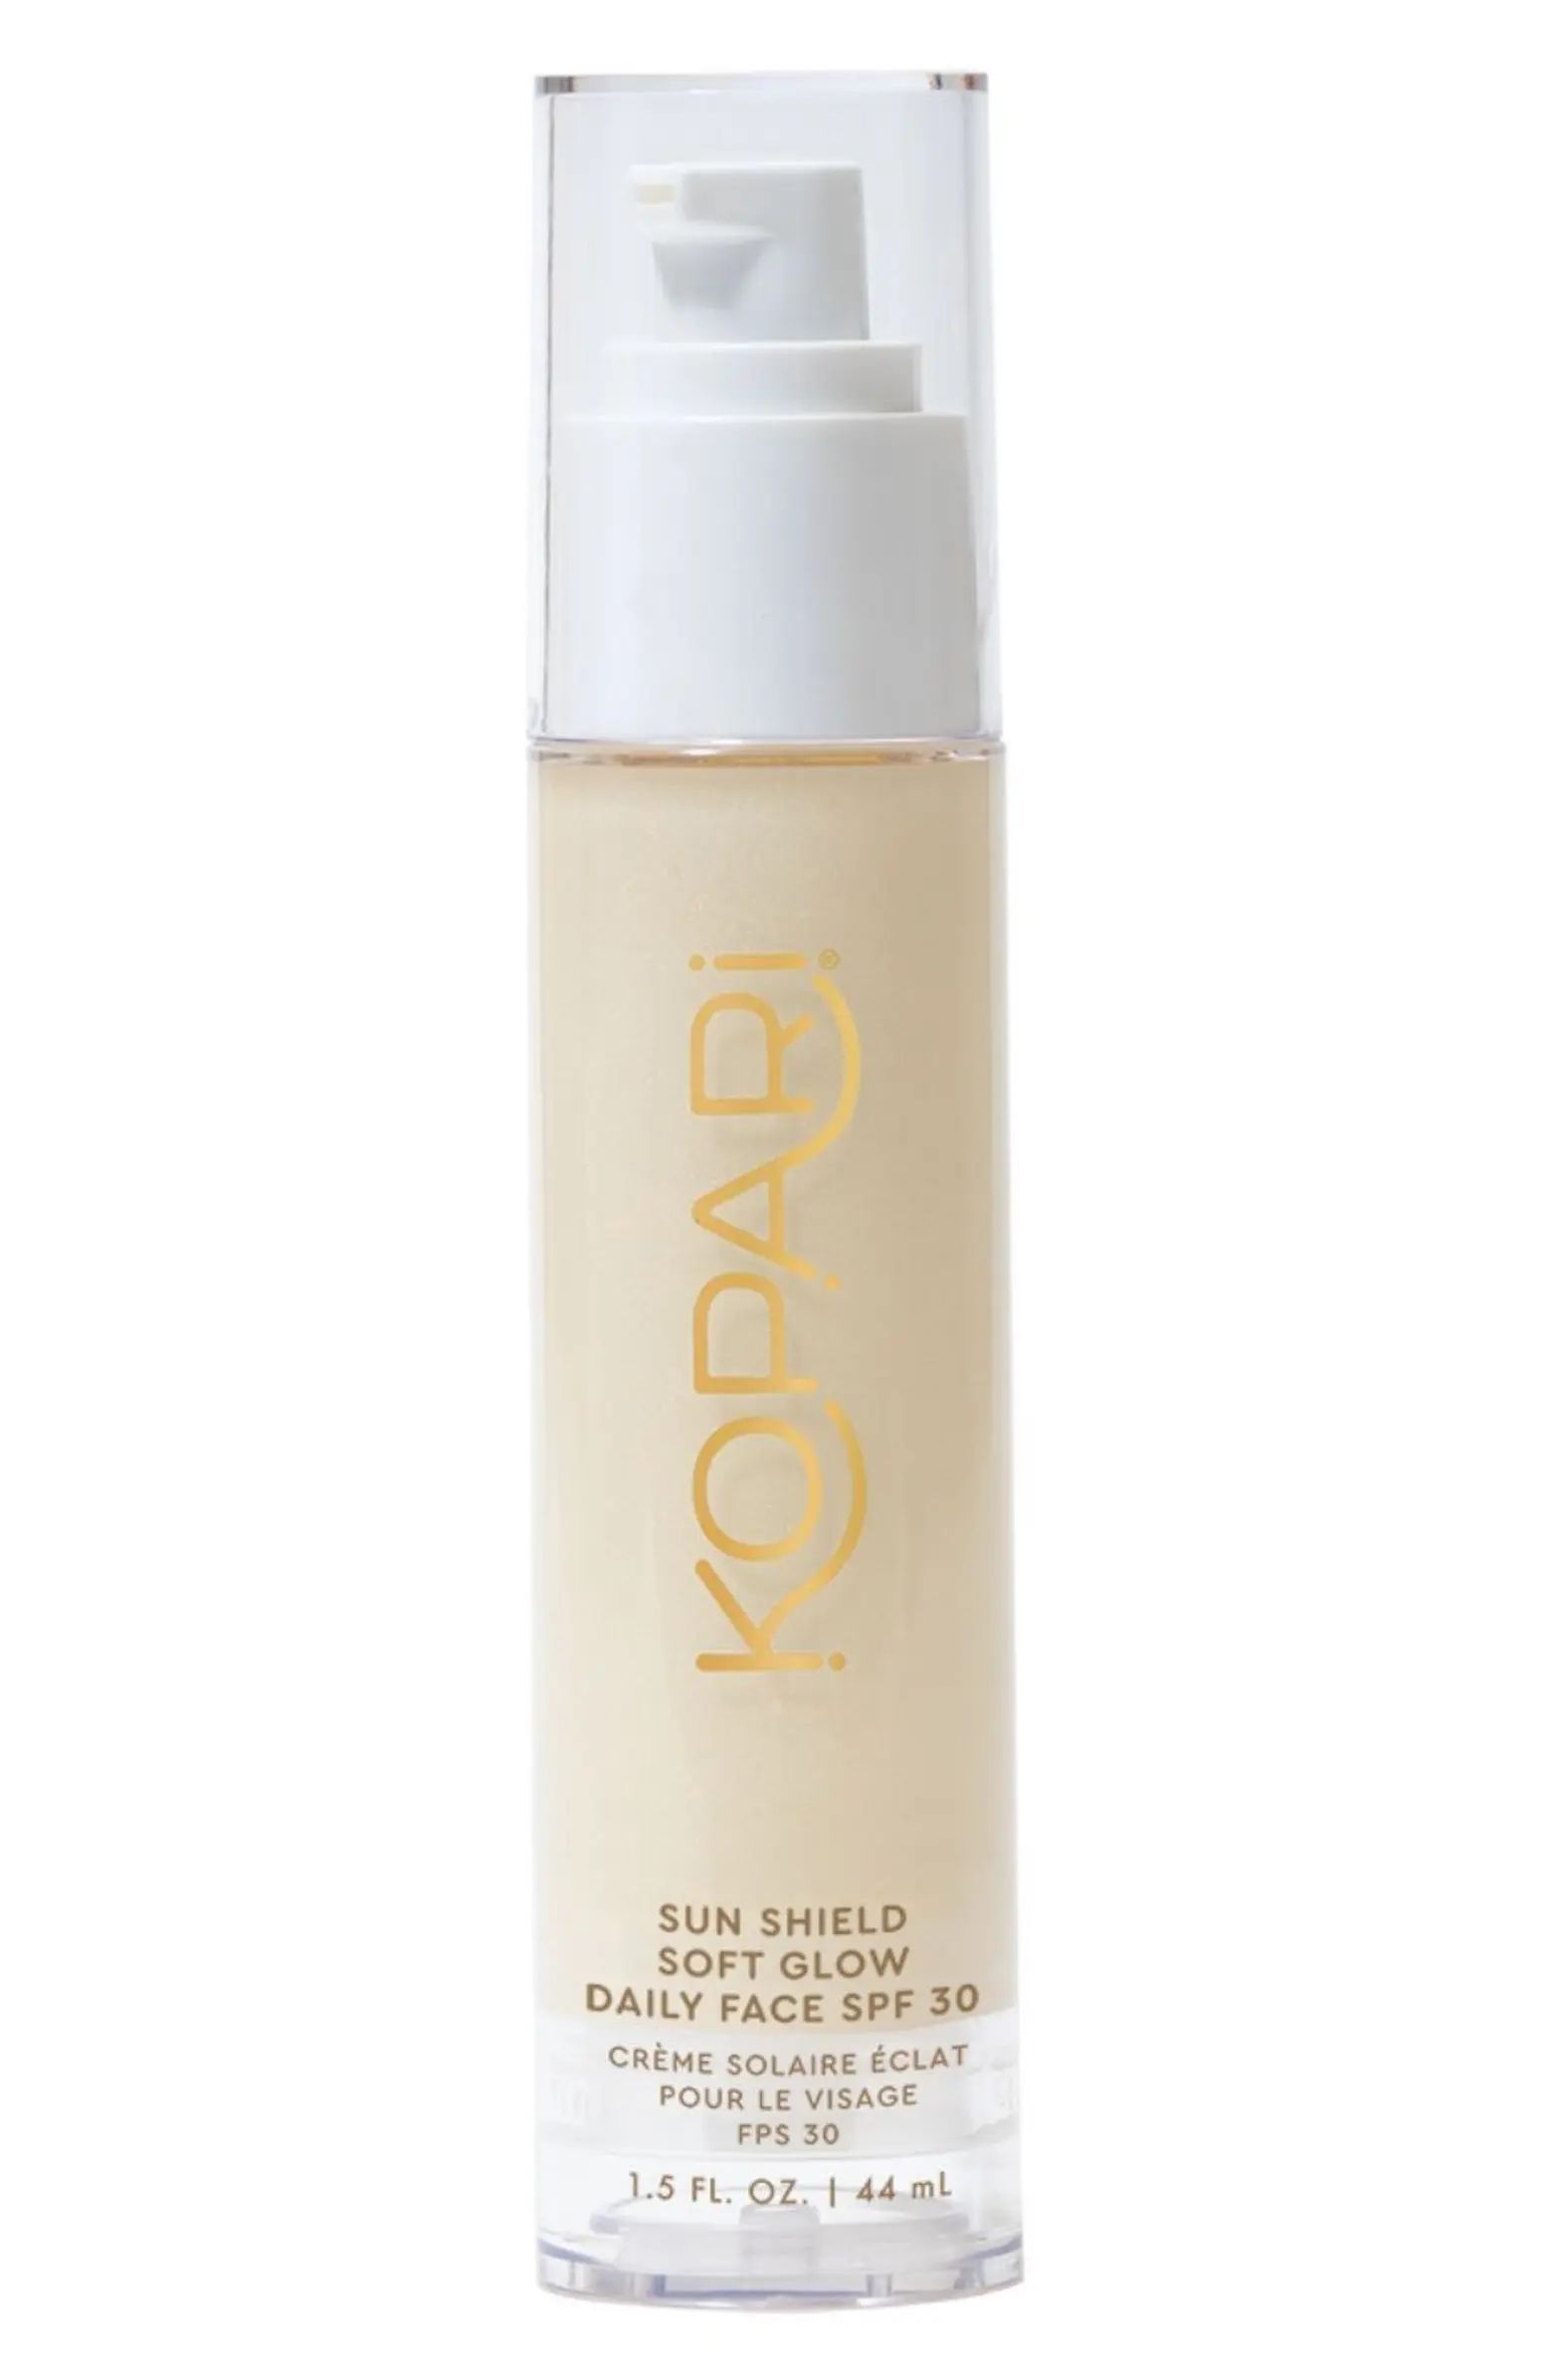 Sun Shield Soft Glow Daily Face SPF 30 | Nordstrom